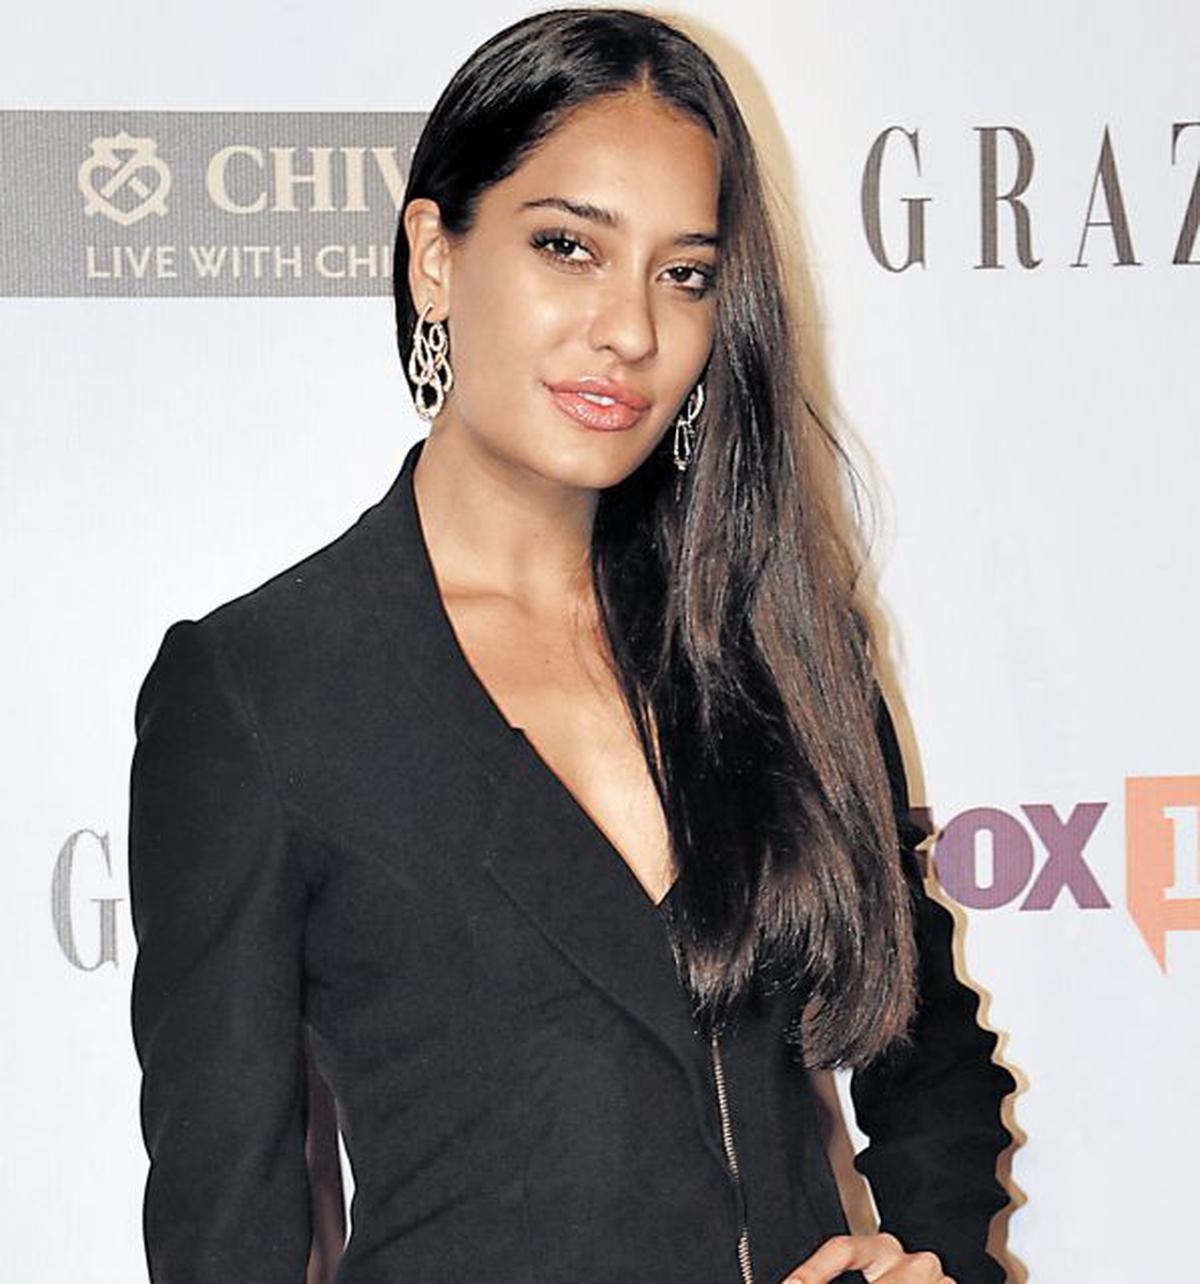 Lisa Haydon: Elisabeth Marie Haydon, popularly known as Lisa Haydon. She is  an Indian model turned actress, who rocked everybody with her bold act in  Queen.